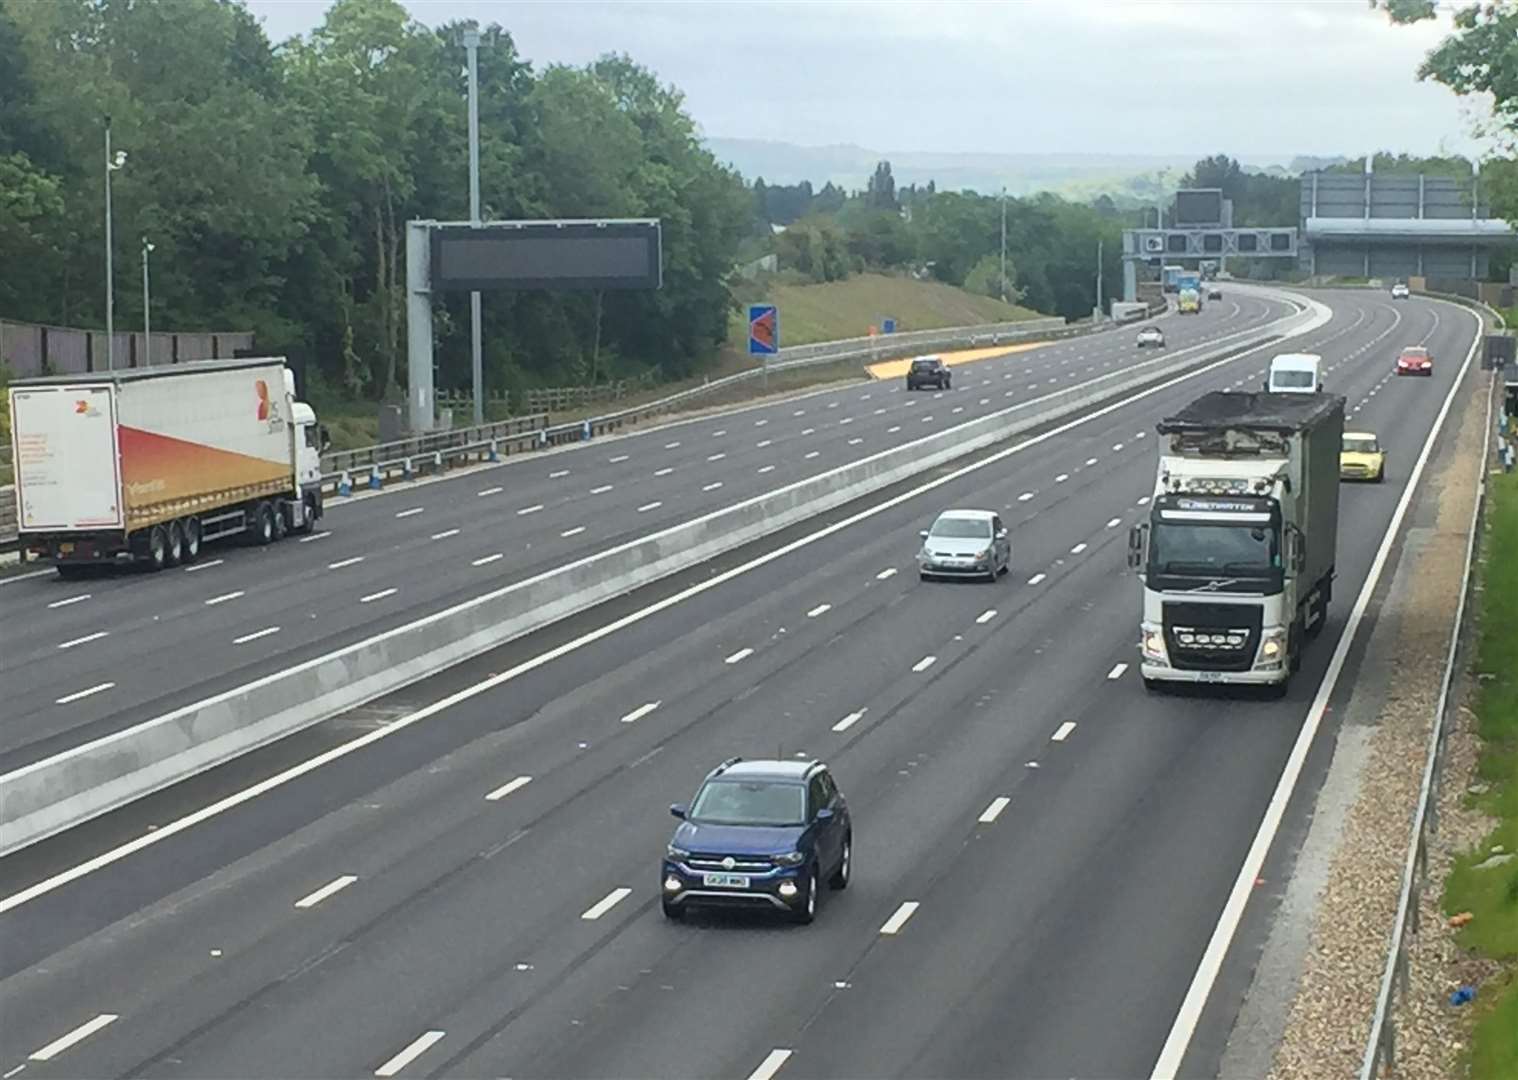 A stretch of smart motorway on the M20